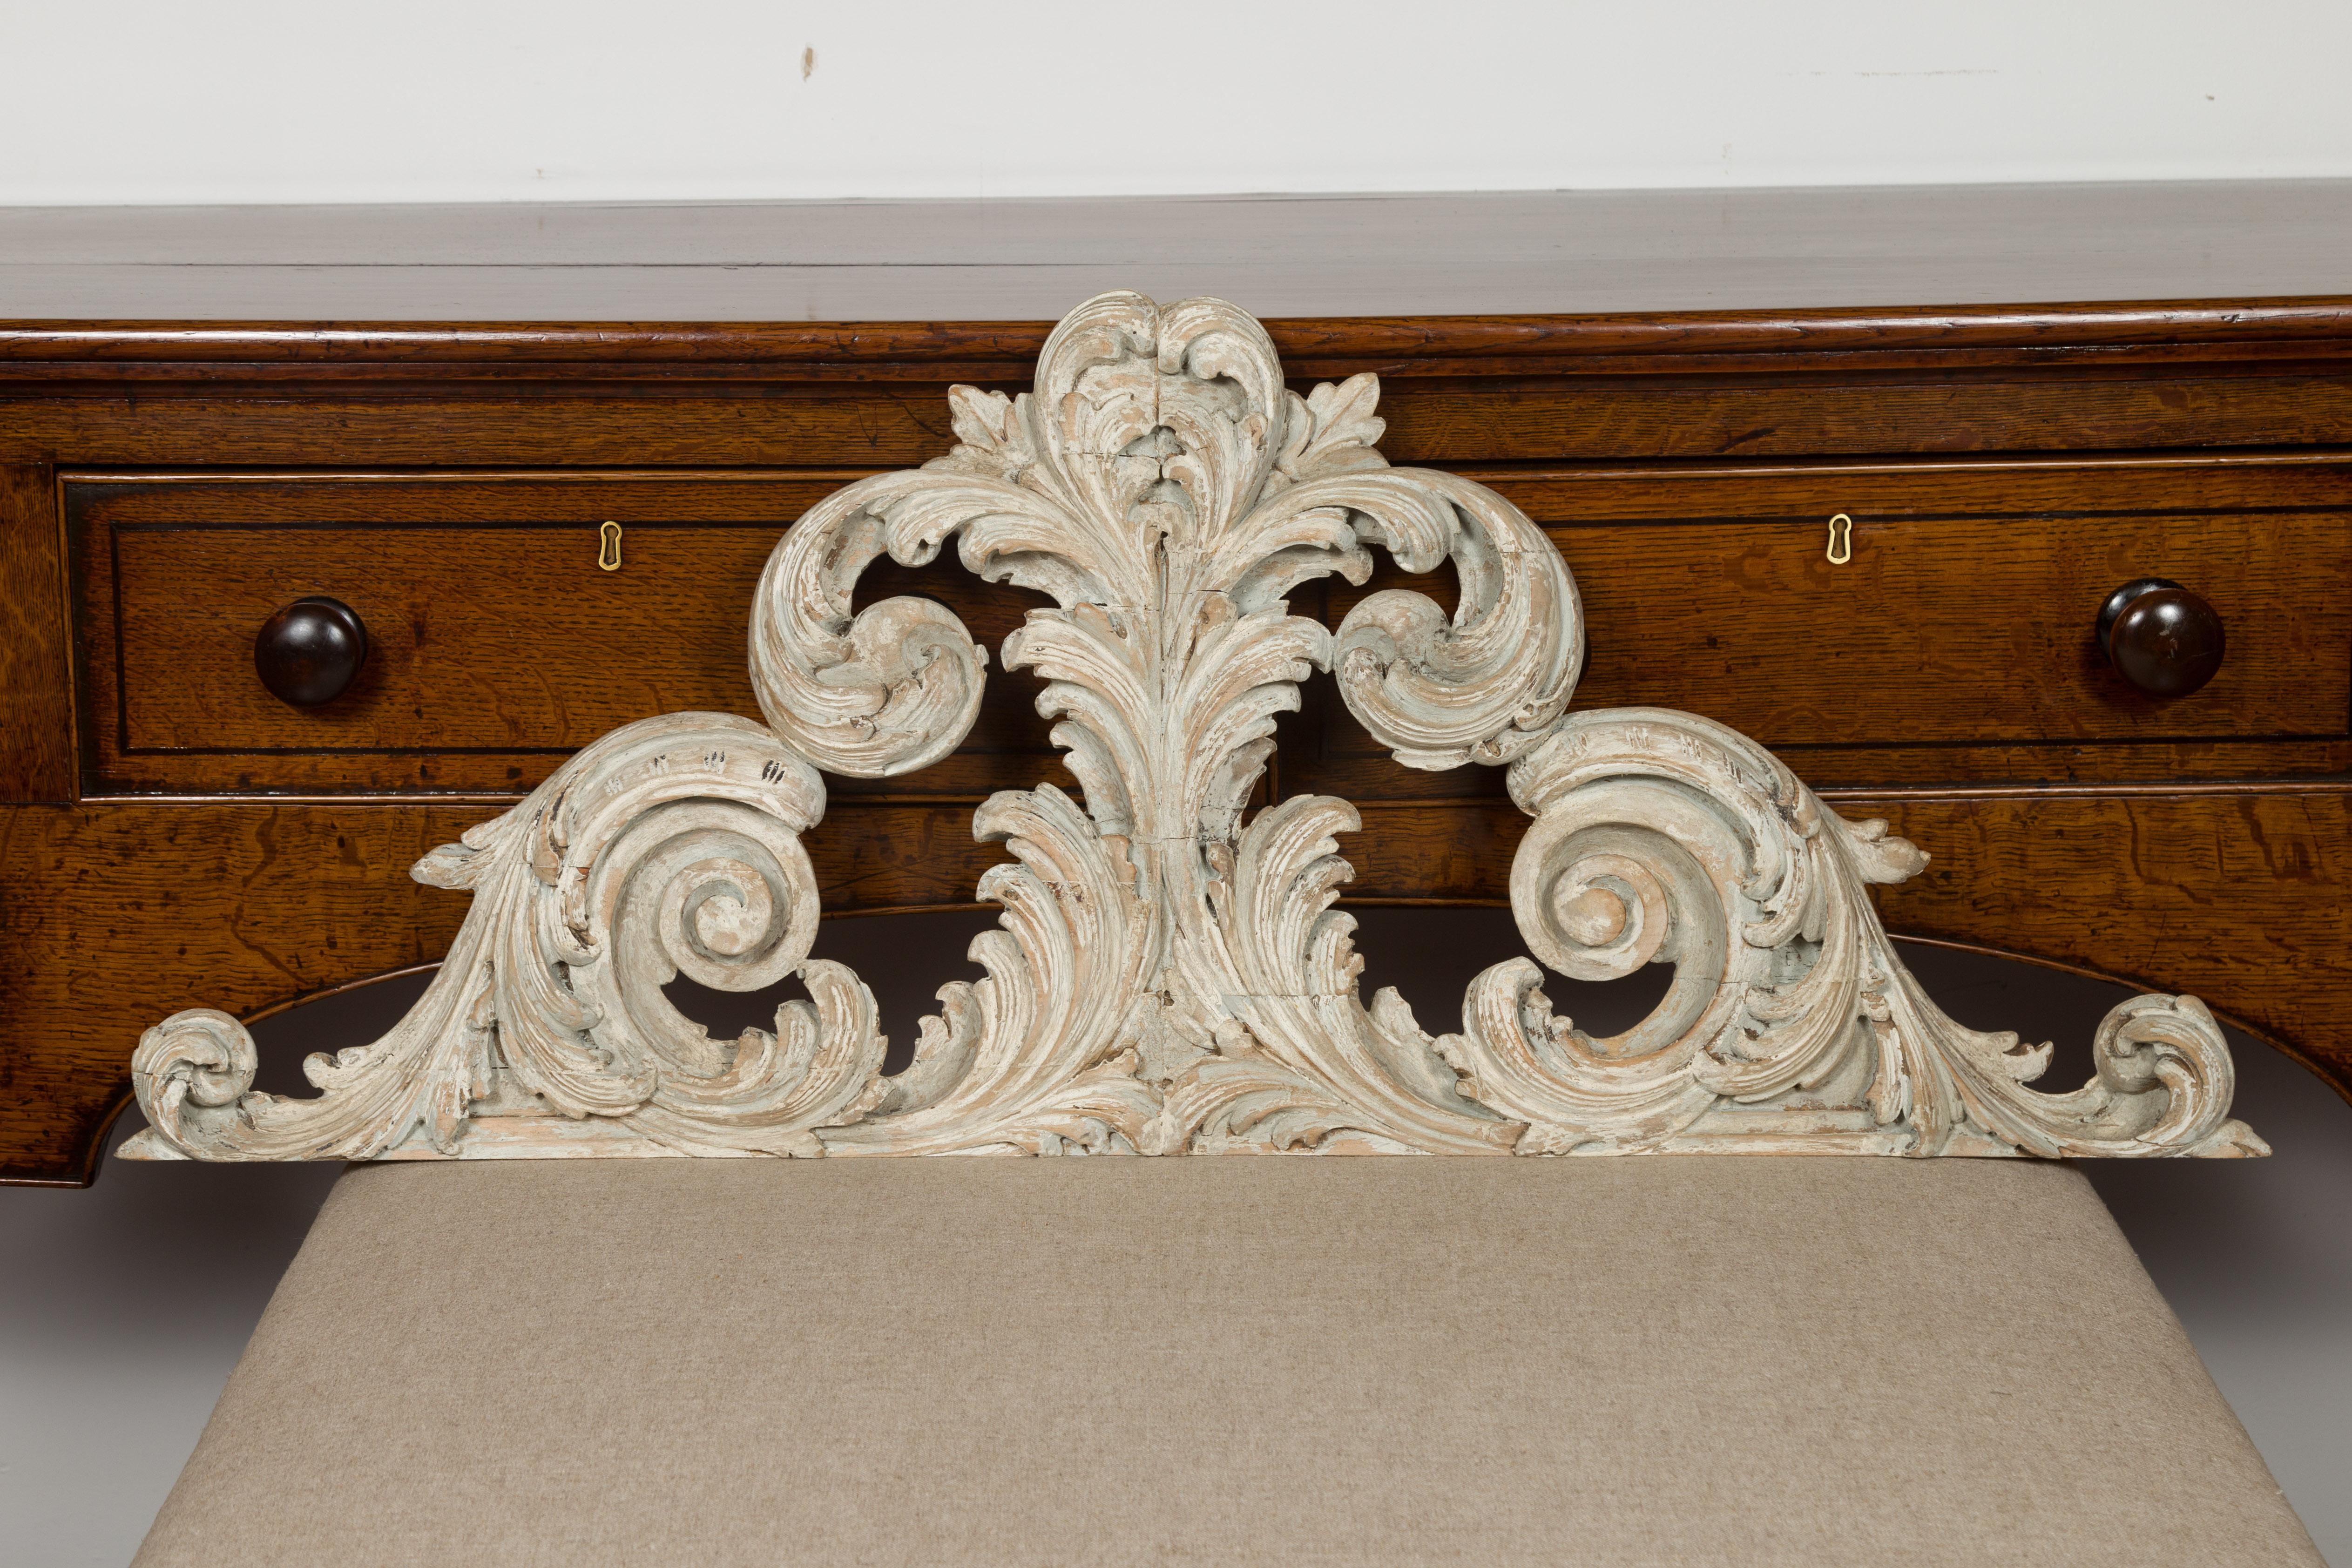 An Italian carved and painted architectural fragment from the 19th century, with volutes and acanthus leaves. Created in Italy during the 19th century, this carved fragment attracts our attention with its sinuous scrolling lines accented with carved